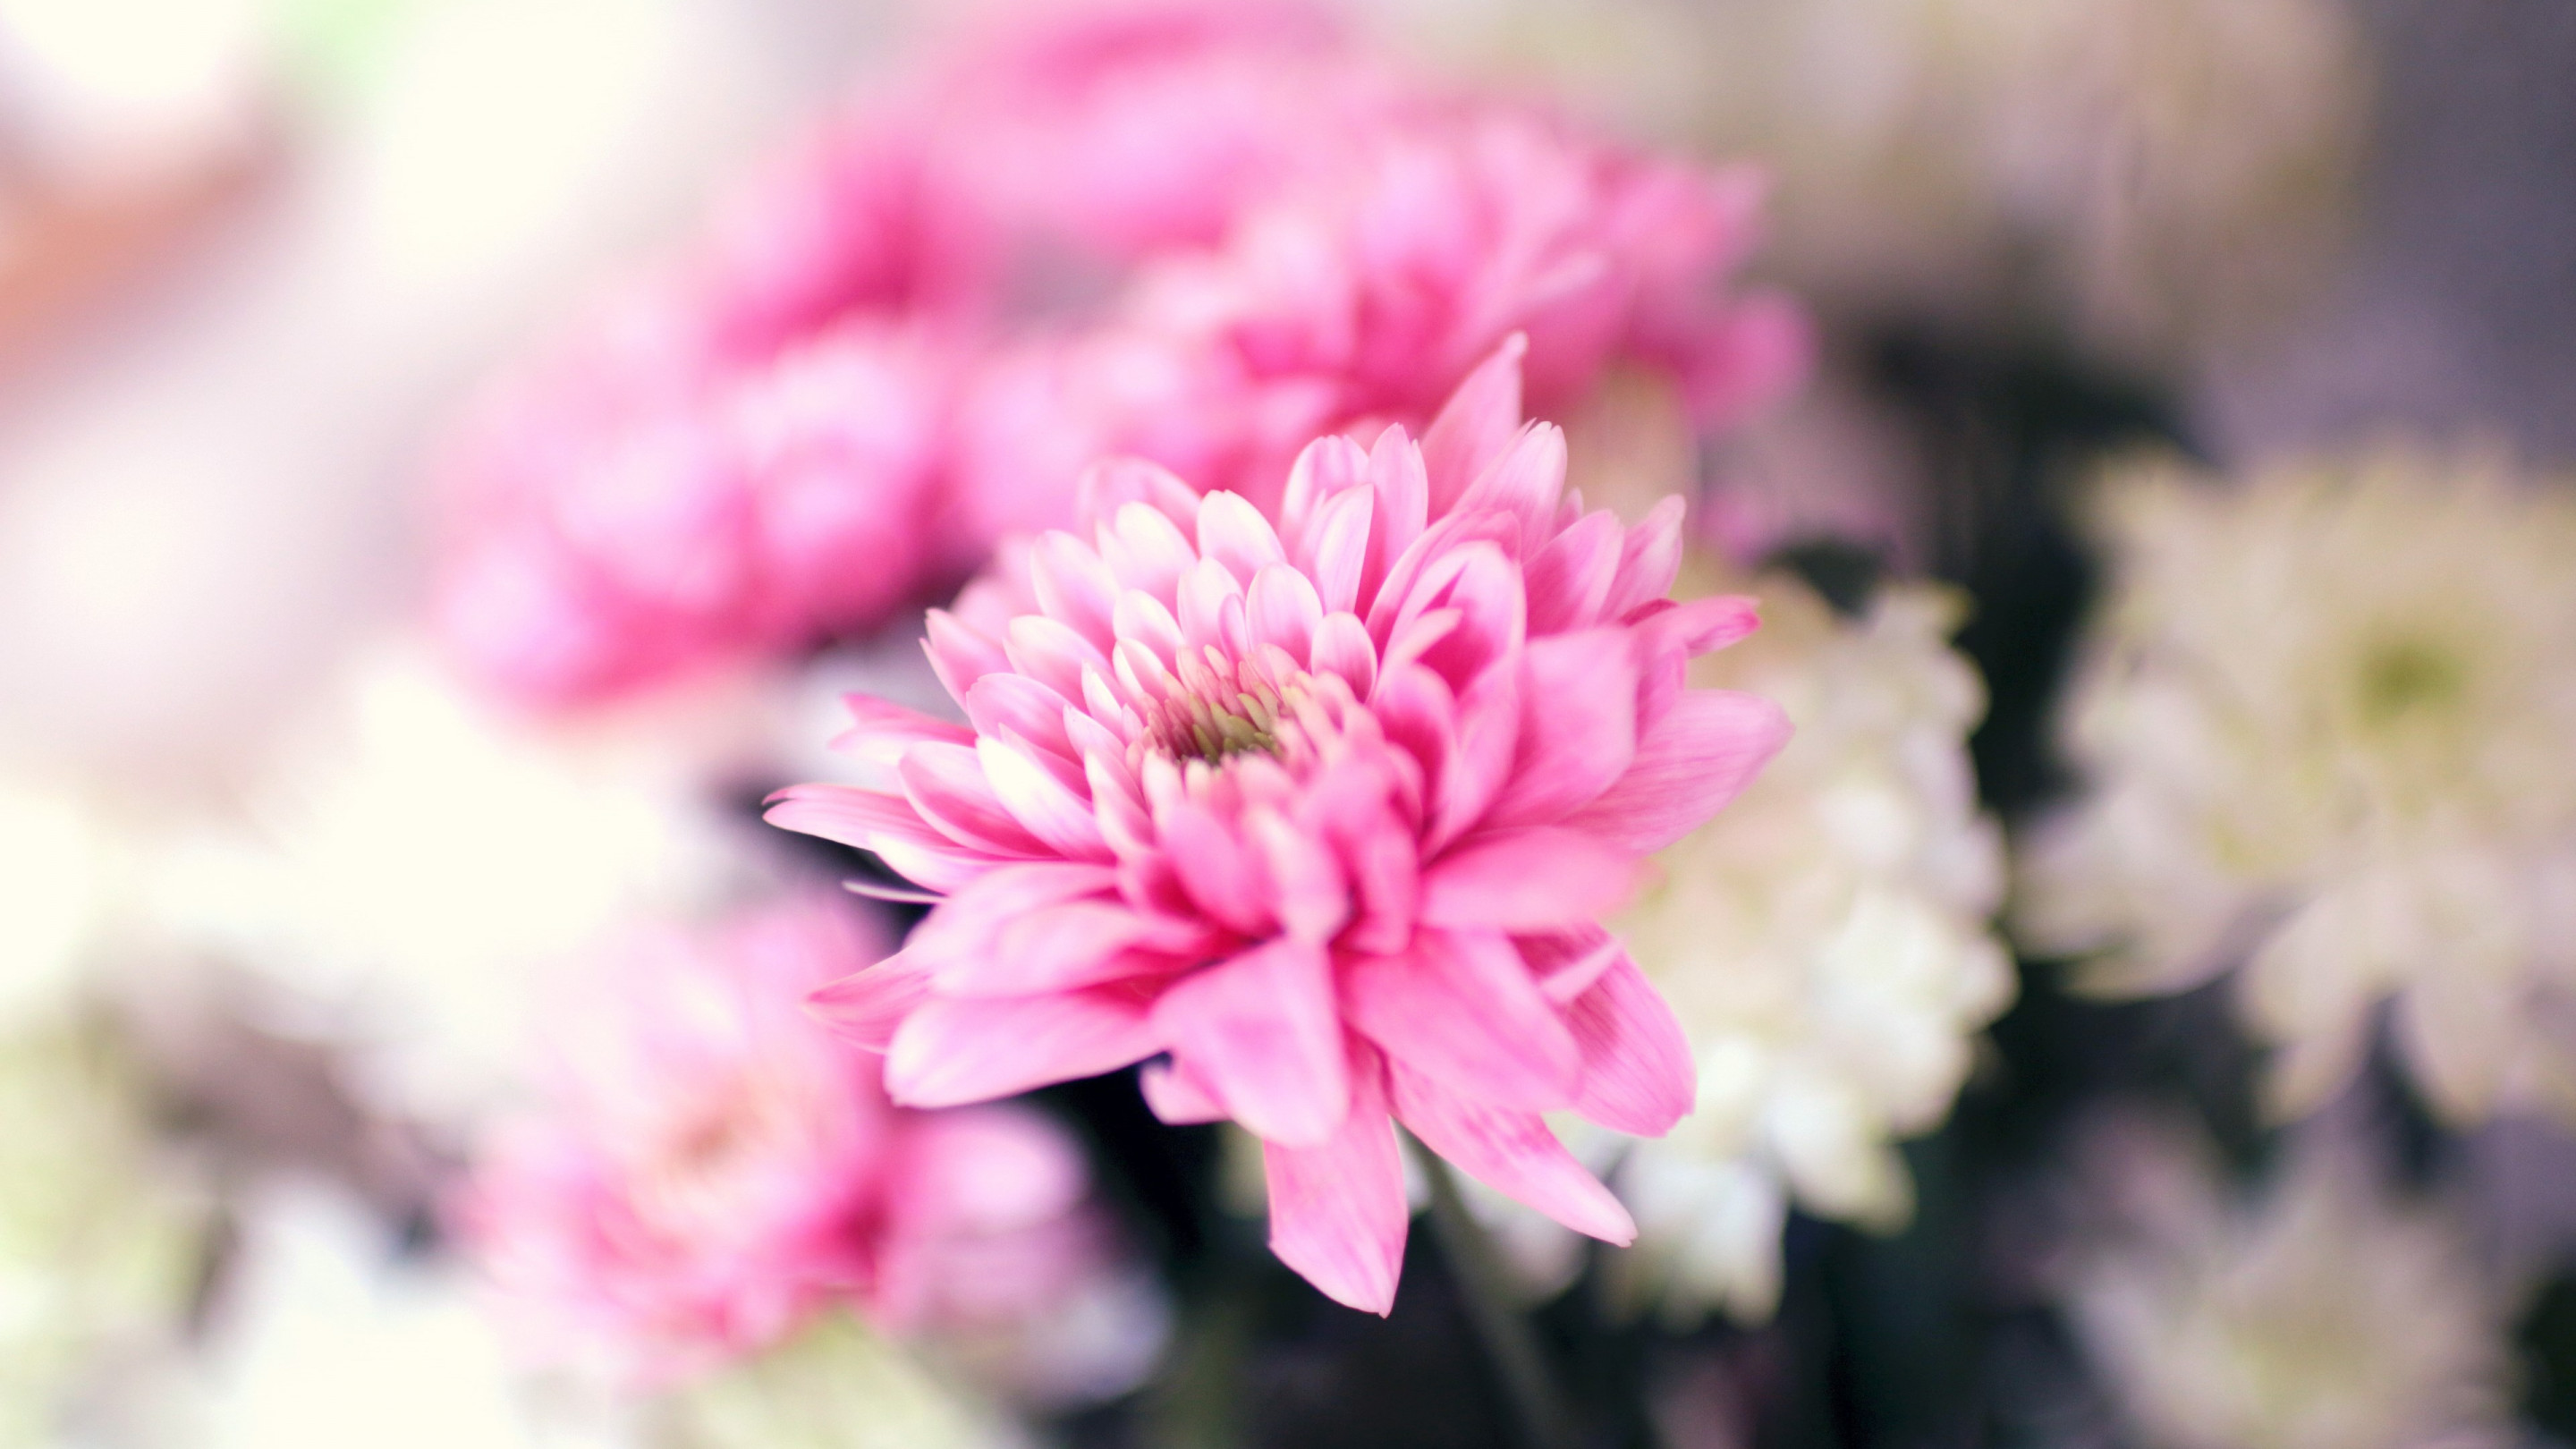 Pink and white flowers wallpaper 2880x1620